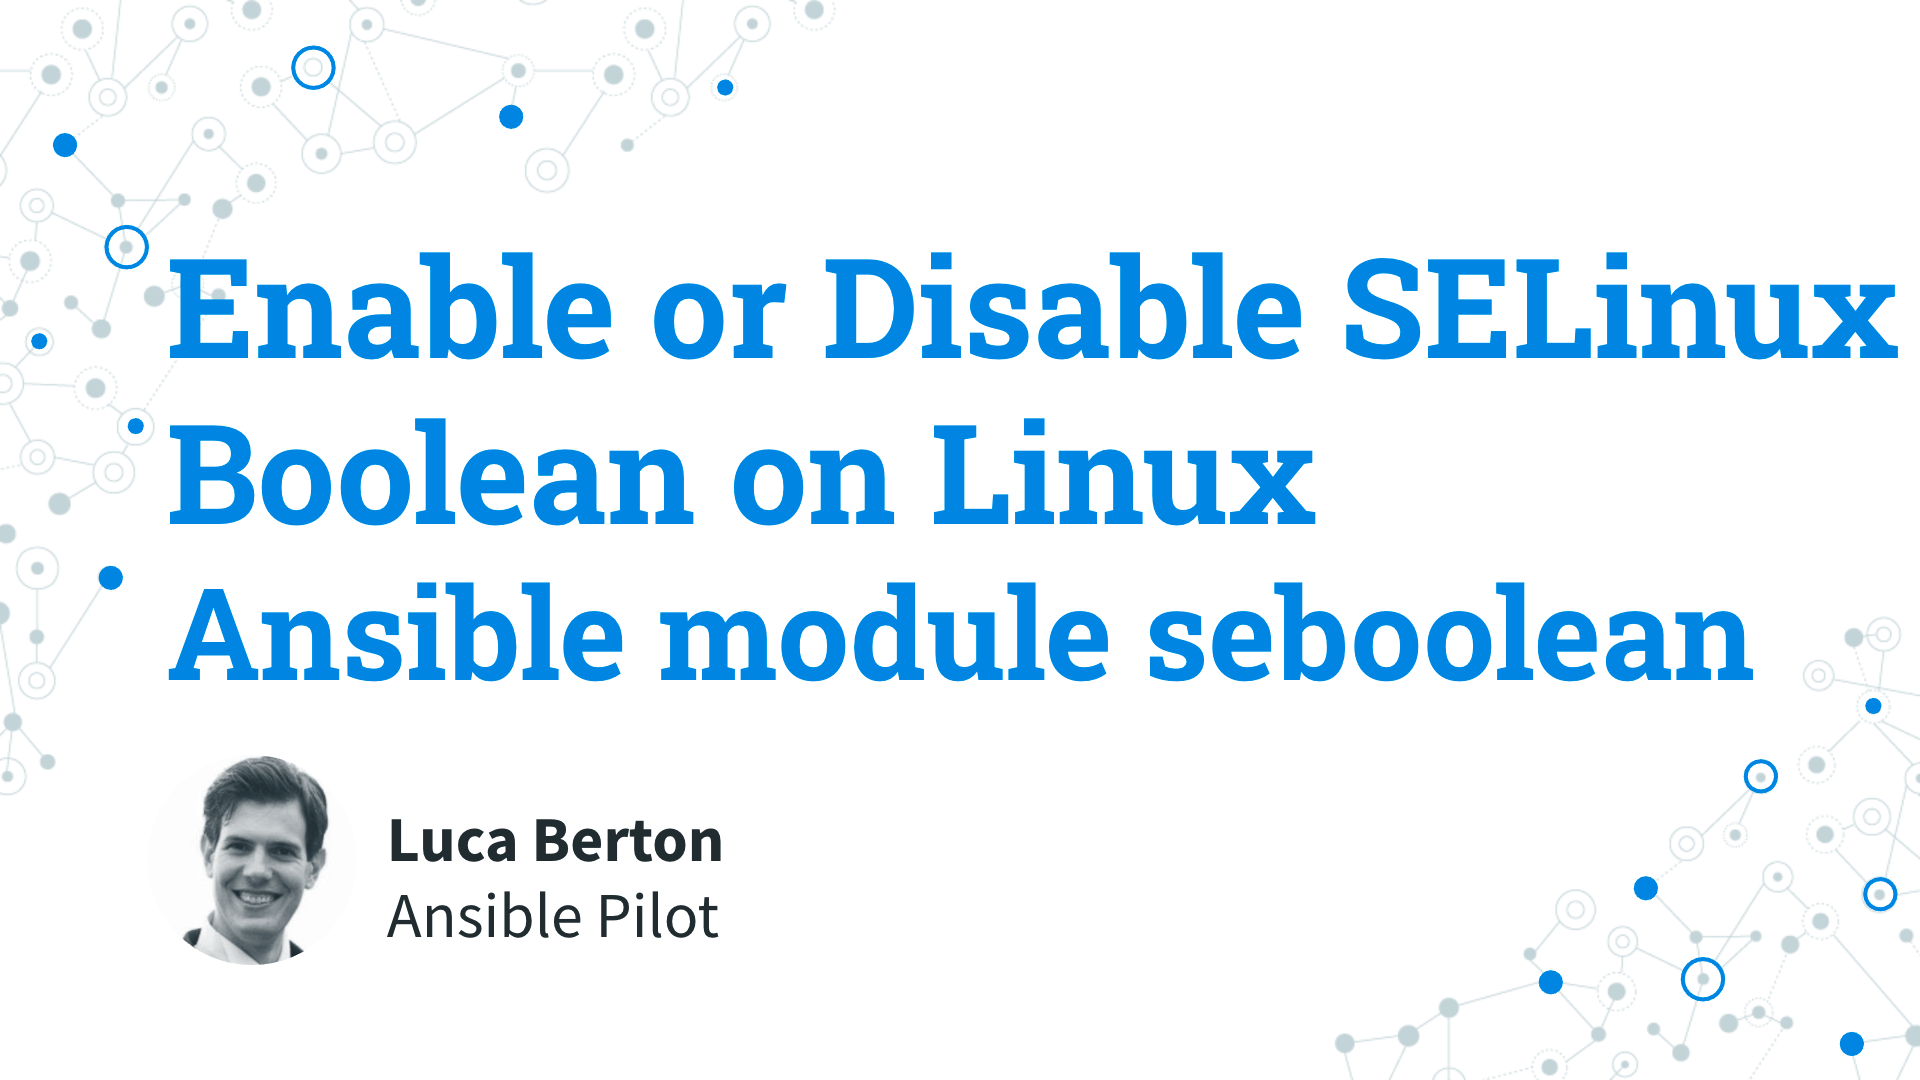 Enable or Disable SELinux Boolean on Linux - Ansible module seboolean